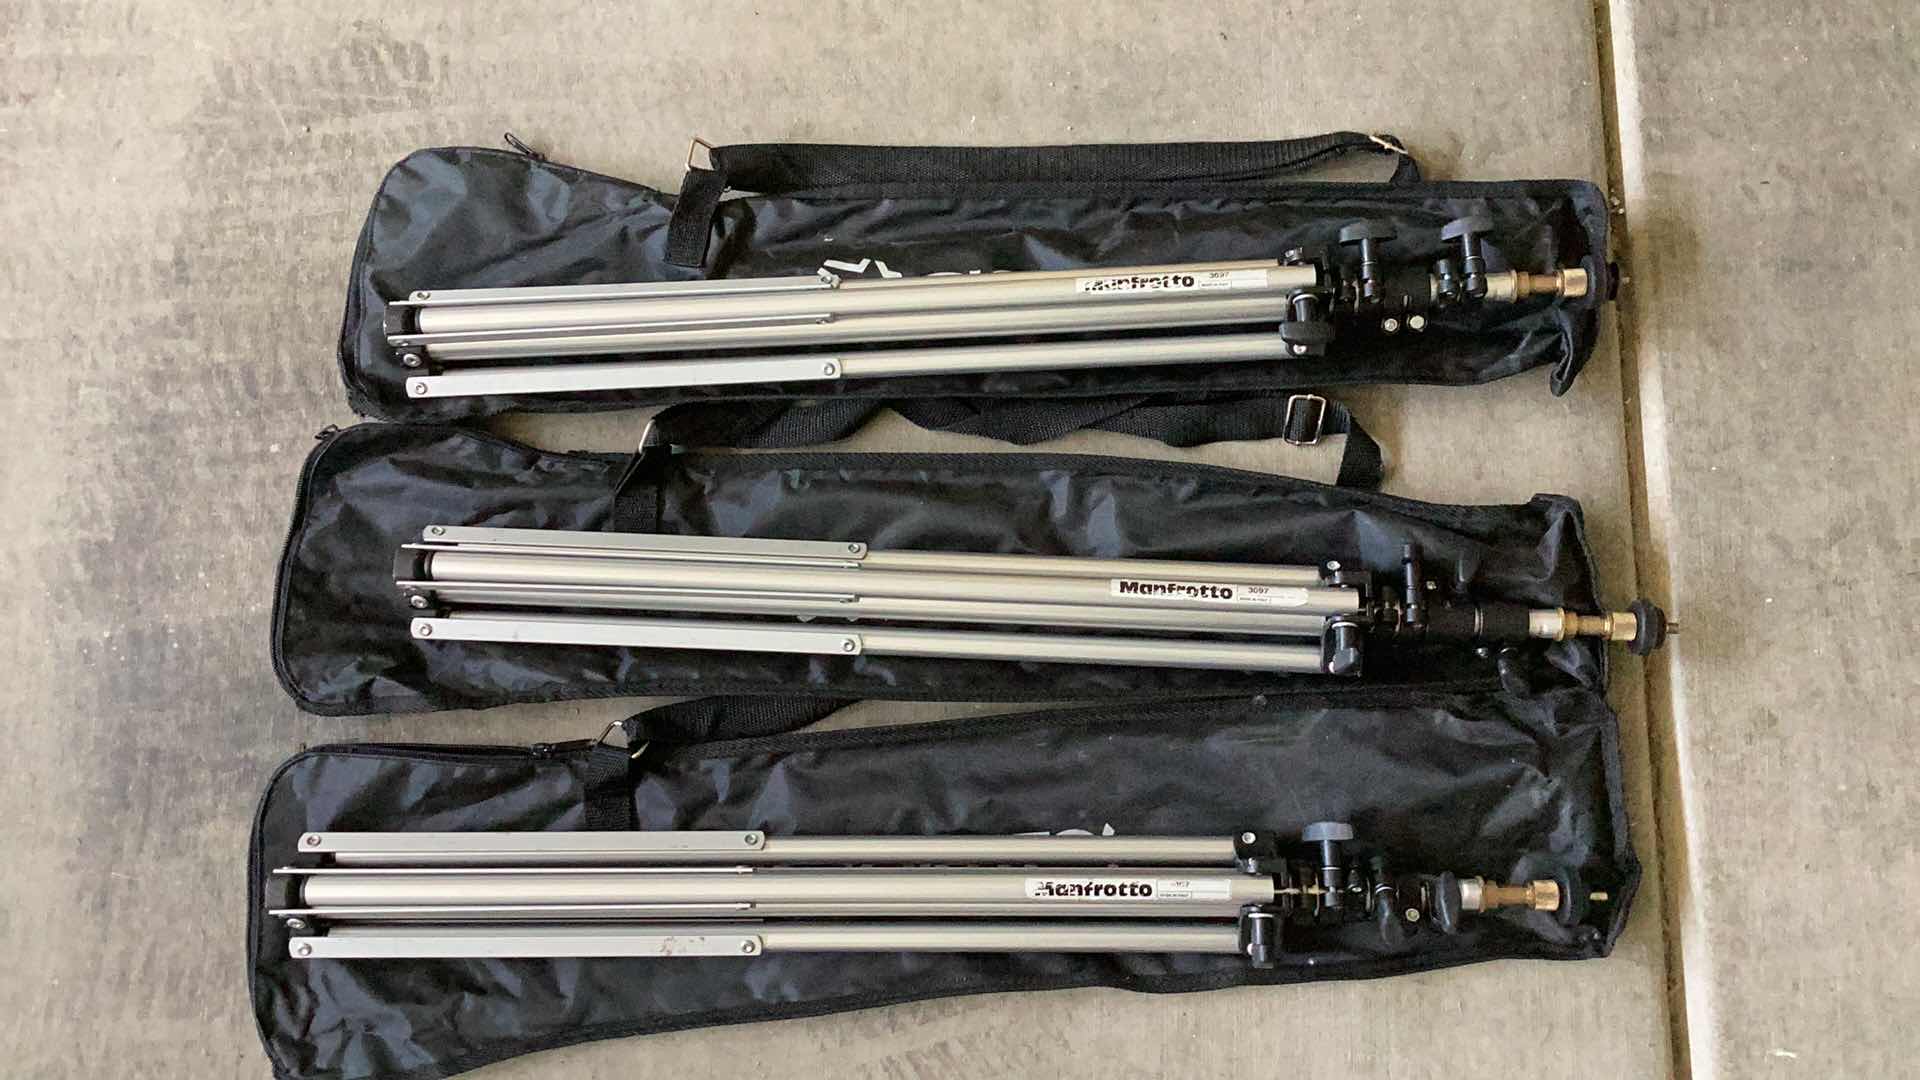 Photo 1 of 3 MANFROTTO ALUMINUM TRIPODS WITH CASES